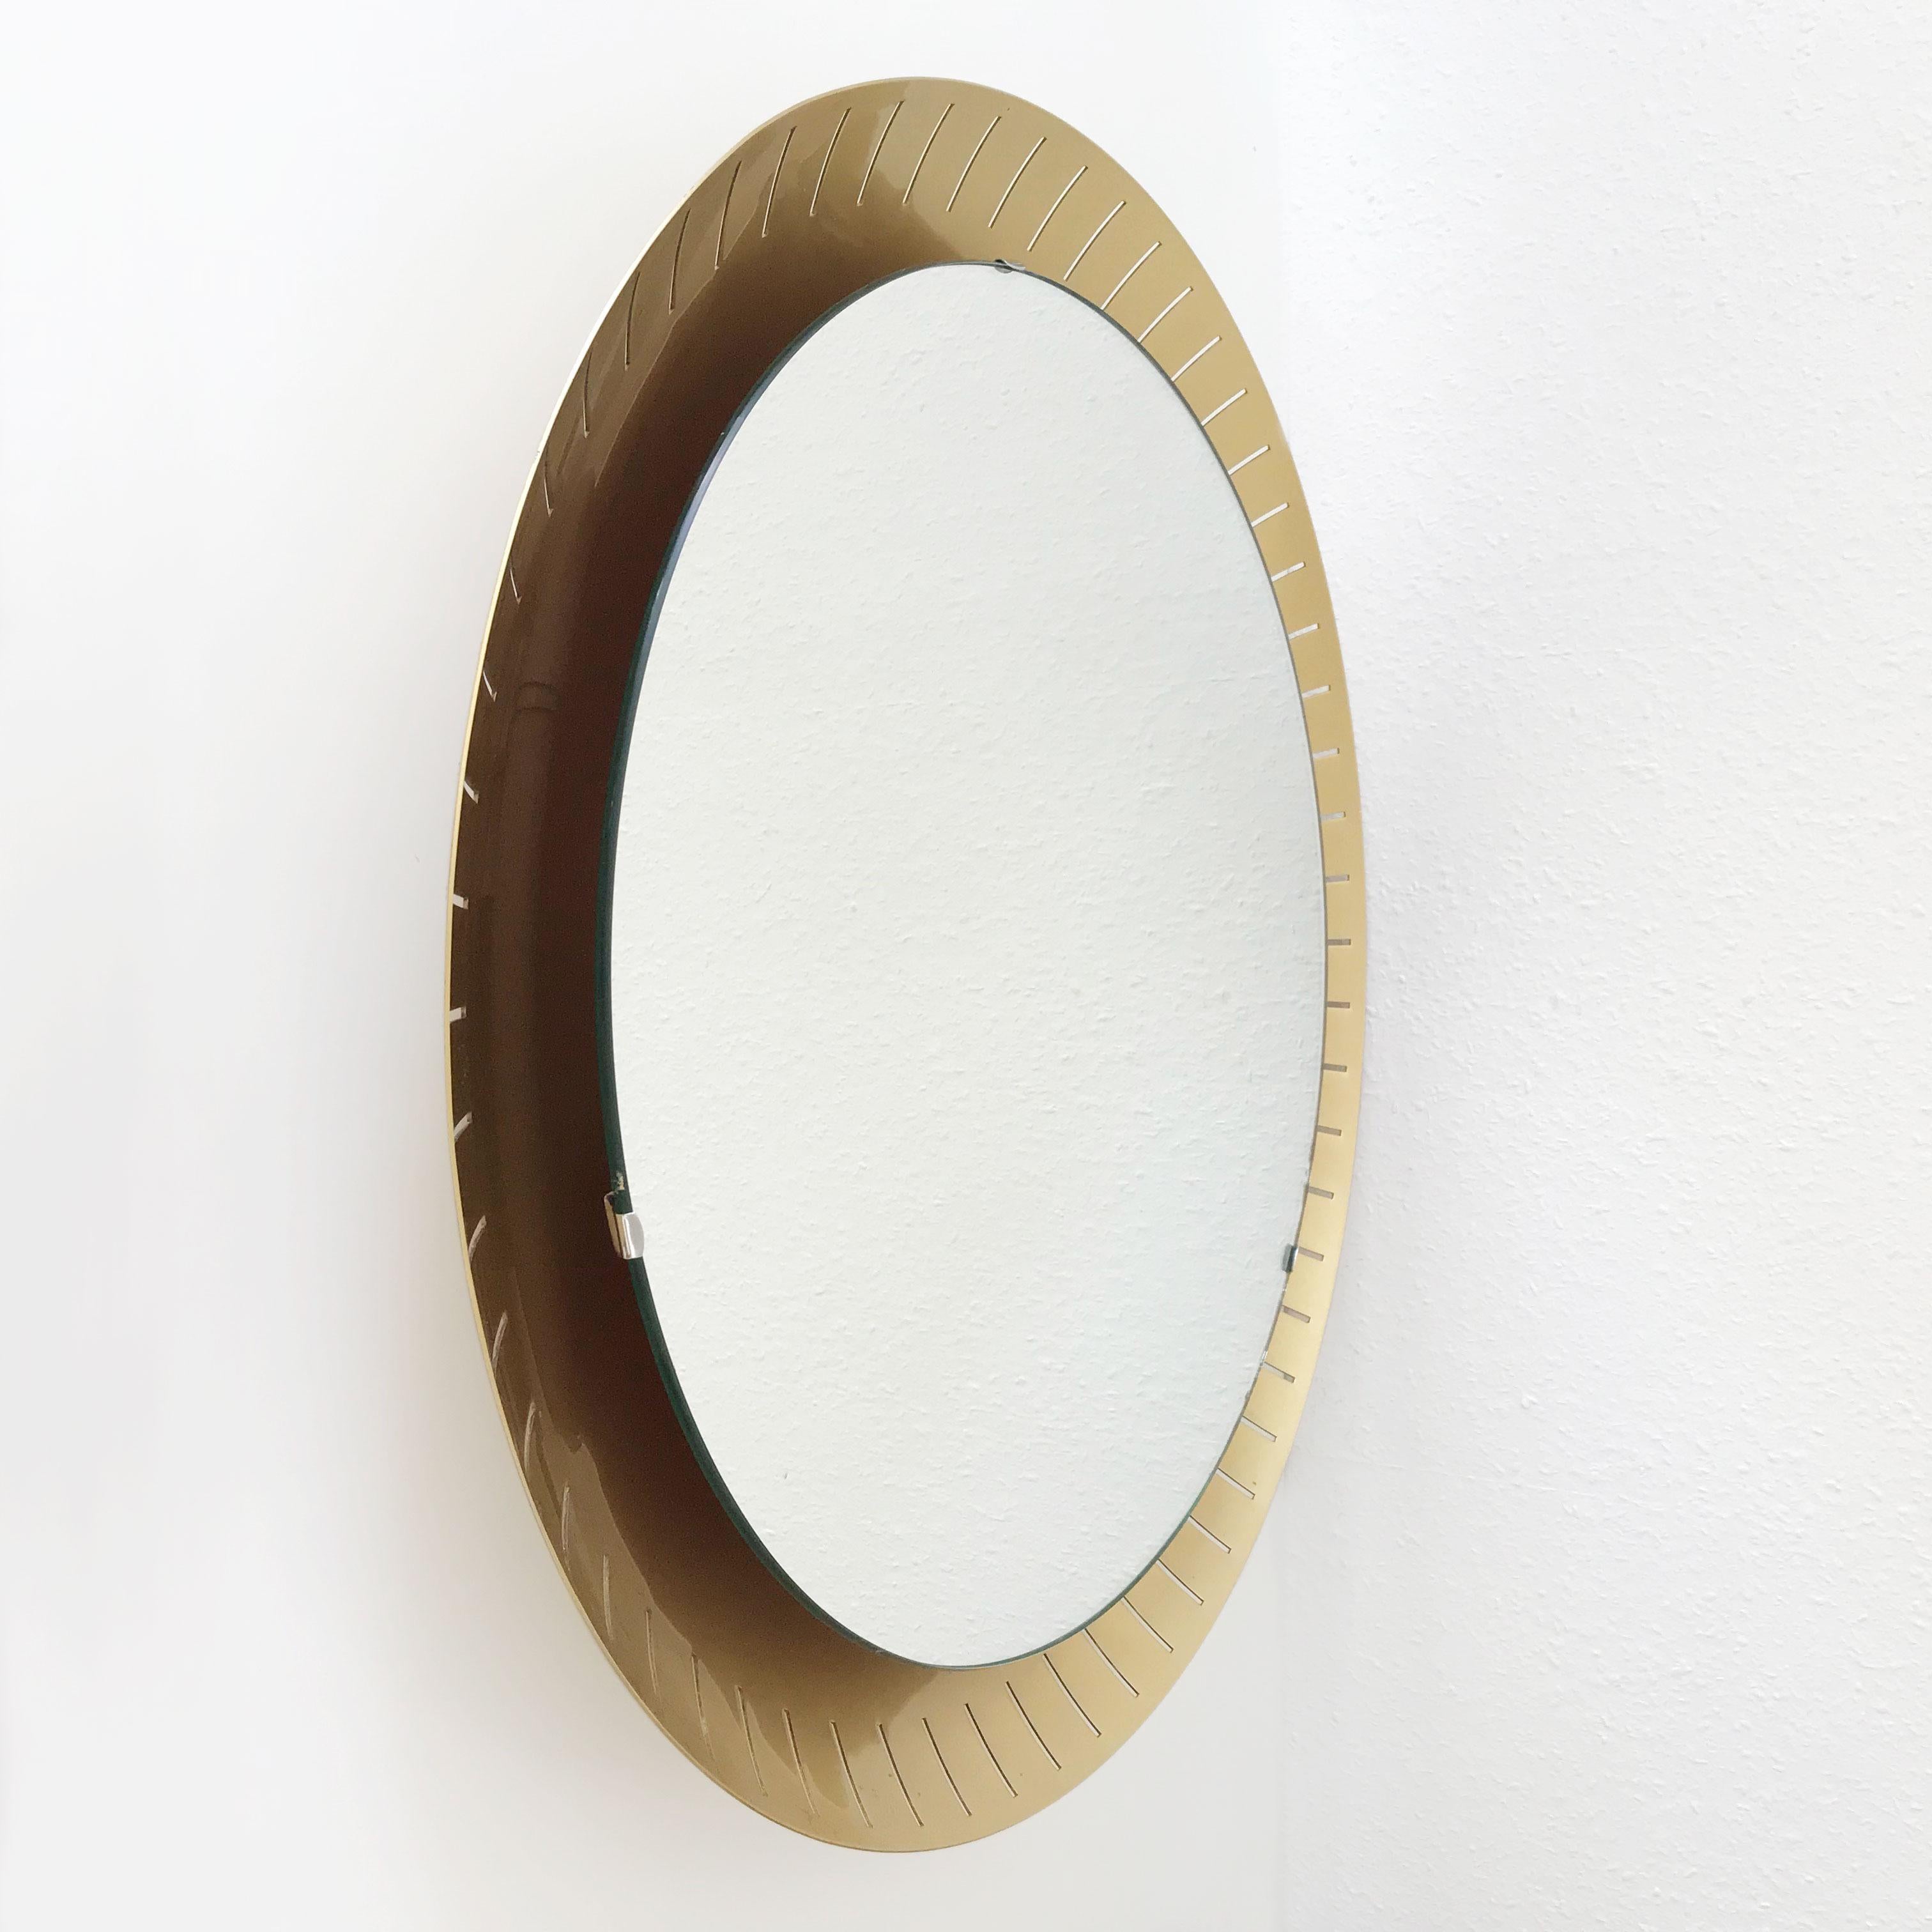 Large Mid-Century Modern Backlit Wall Mirror by Hillebrand, 1950s, Germany For Sale 4